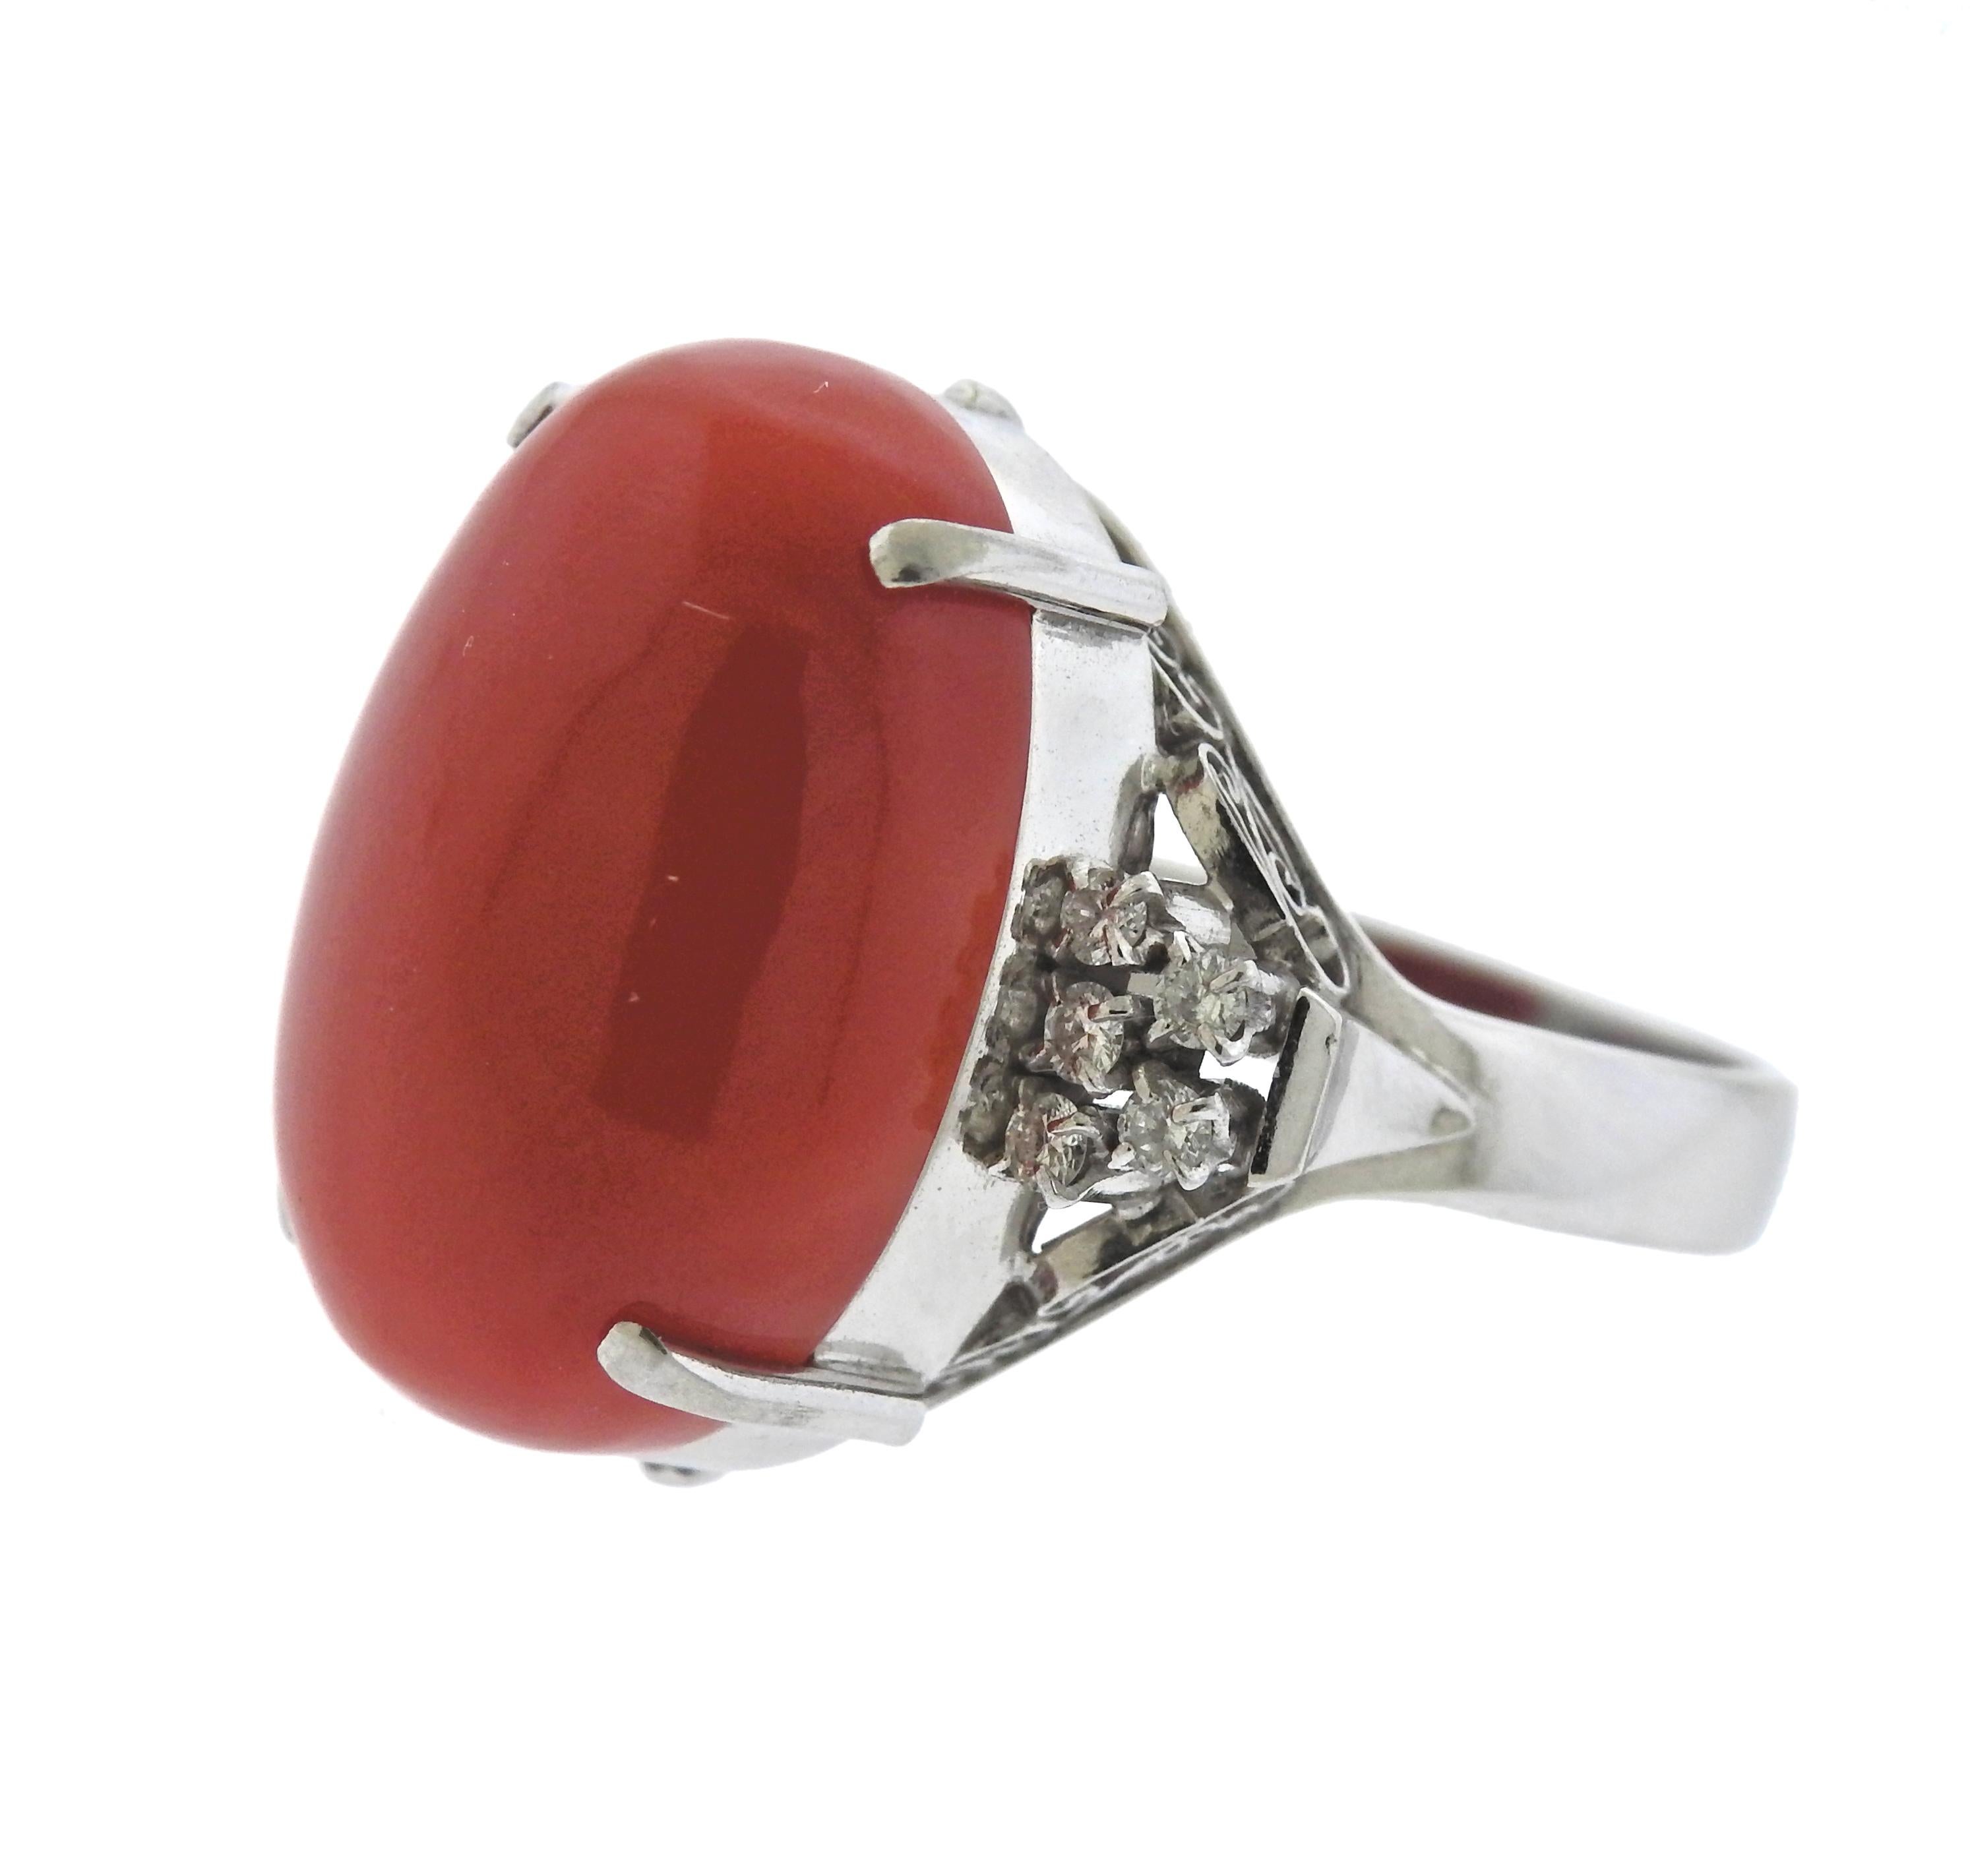 Platinum cocktail ring, set with oval 19.8mm x 13.4mm x 7mm coral gemstone, surrounded with 0.20ctw in H/VS diamonds. Ring size - 6 3/4, ring top - 20mm x 20mm, weighs 11.6 grams. Marked:  pt900, 0.20.